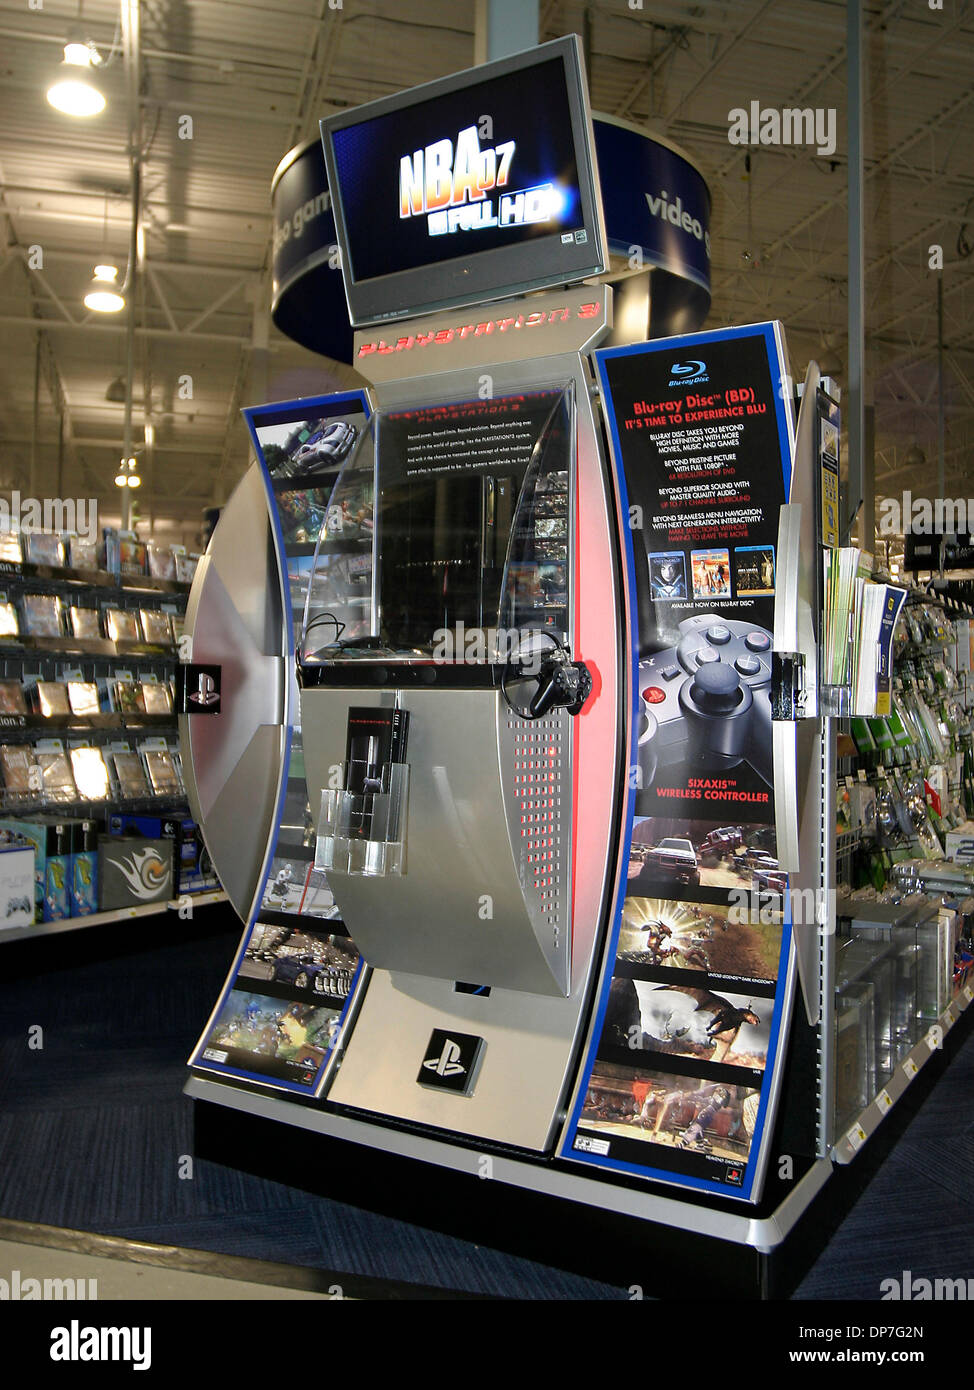 Nov 17, 2006; Essex, MD, USA; Buy's newest display featuring Sony's Playstation 3 video game system. Video game faithfuls had their first chance purchase Sony's Playstation 3 Friday Morning as